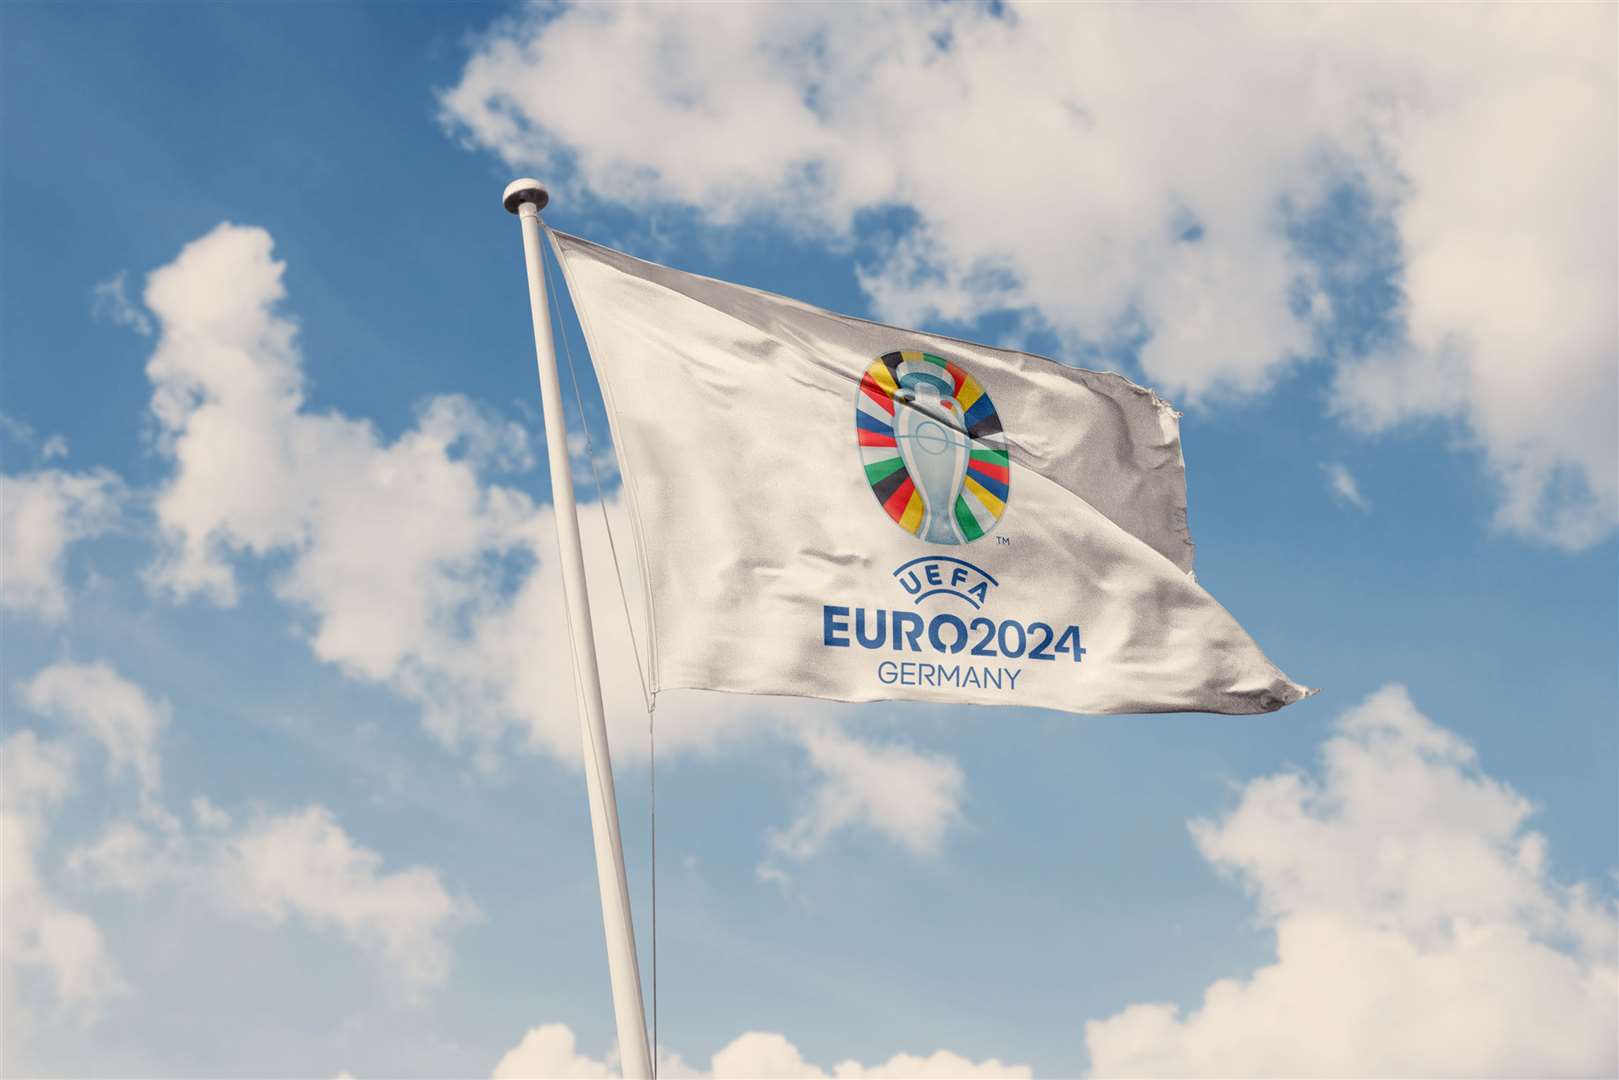 Scotland will take on the host nation in the opening match of the Euro 2024 tournament in Germany.